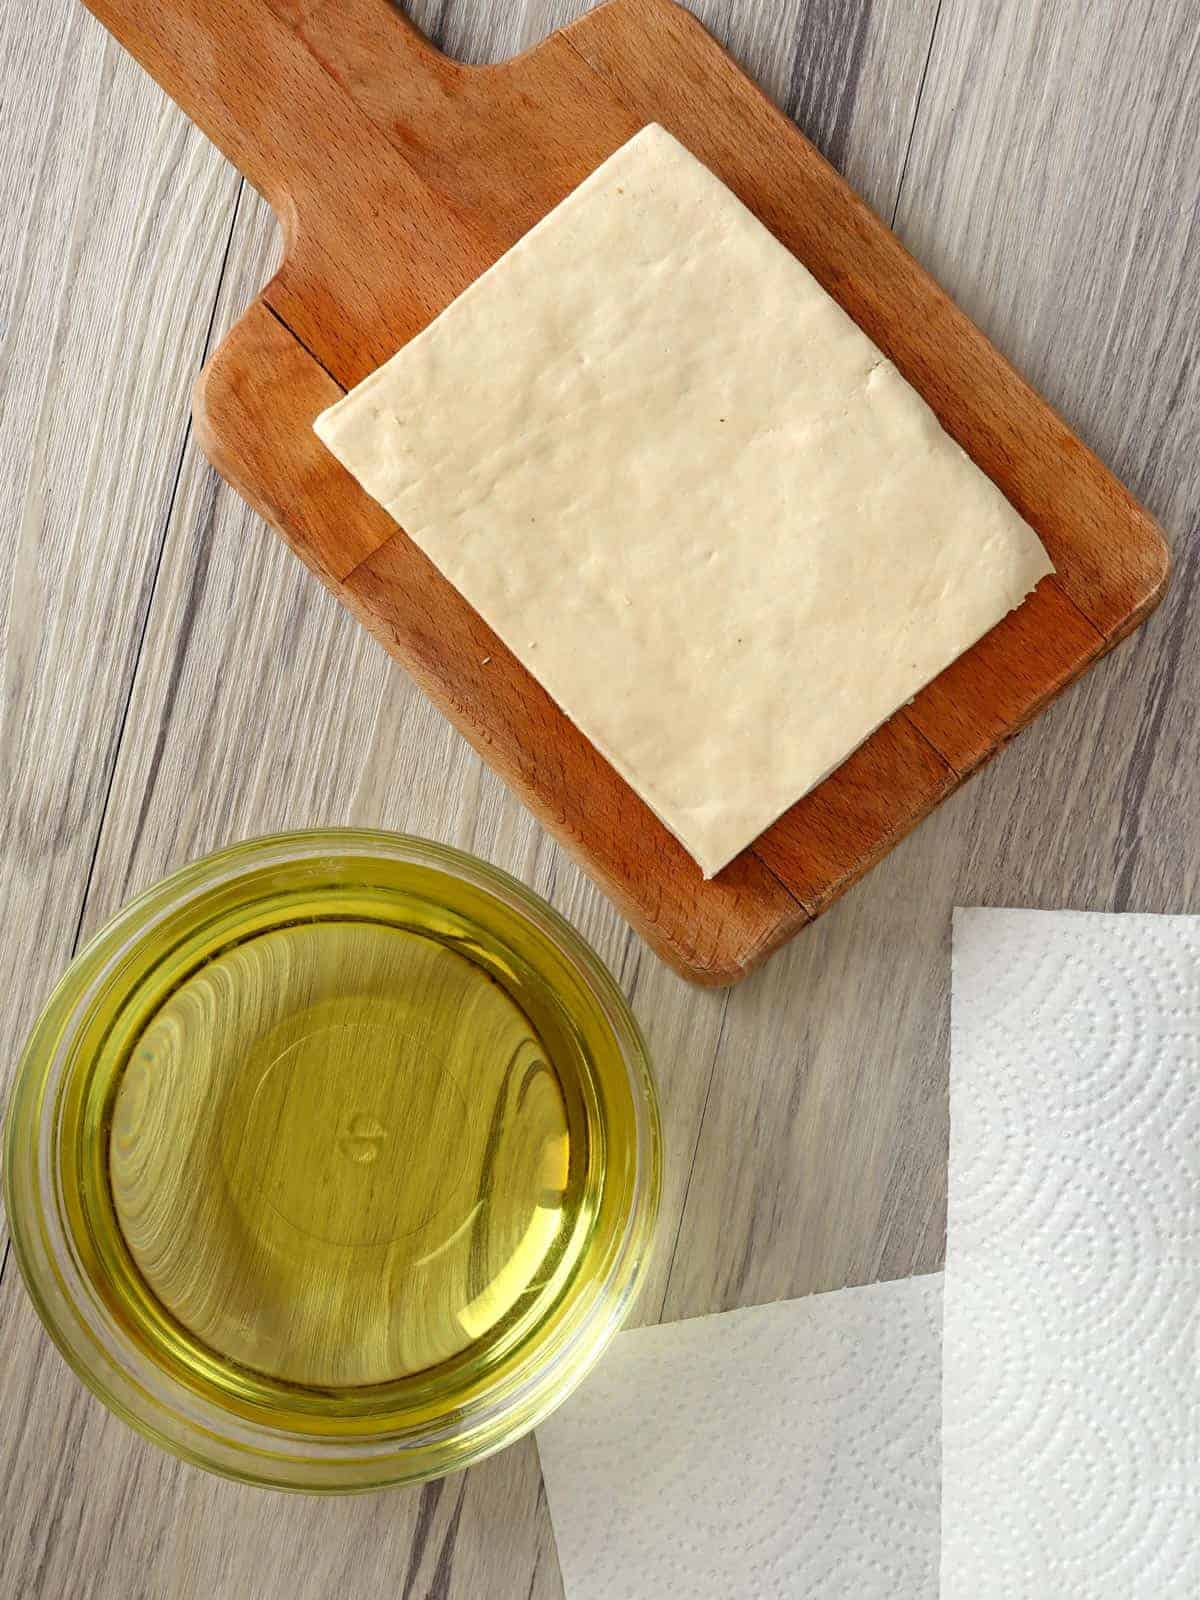 firm tofu block on a cutting board and a bowl of oil